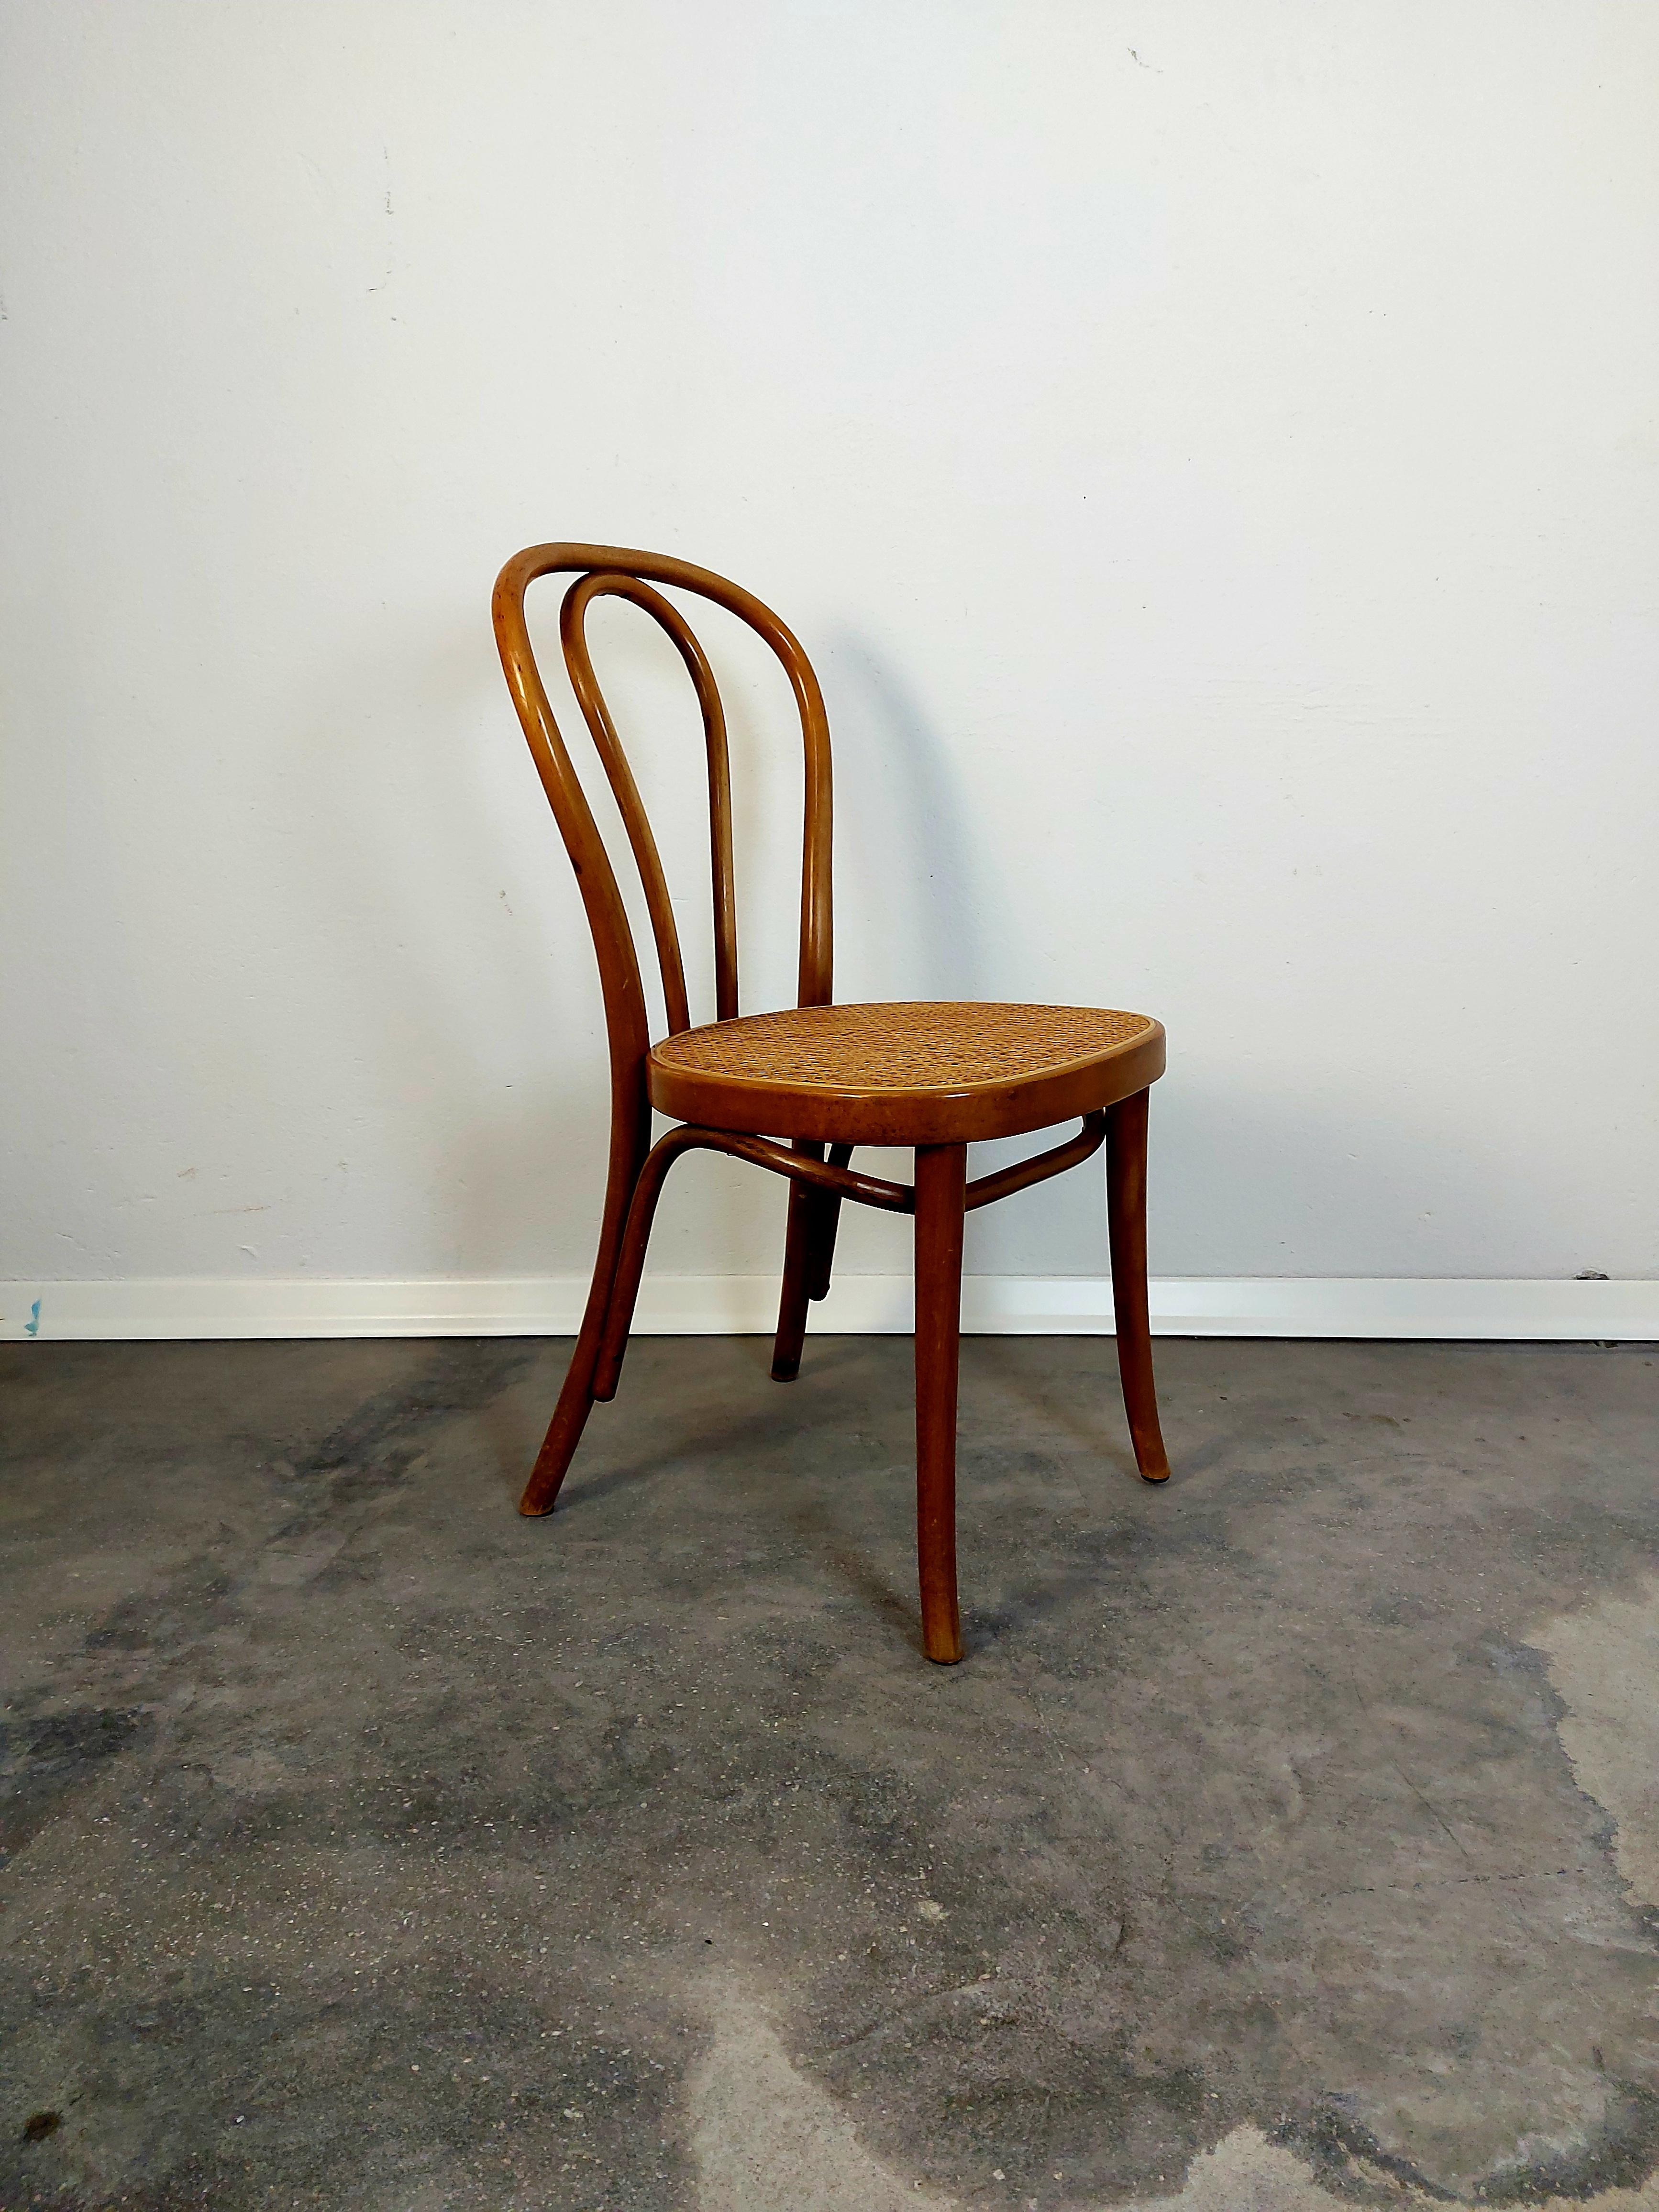 1 of 4, Dining chair, Bentwood cane, No. 18, 1960s 7